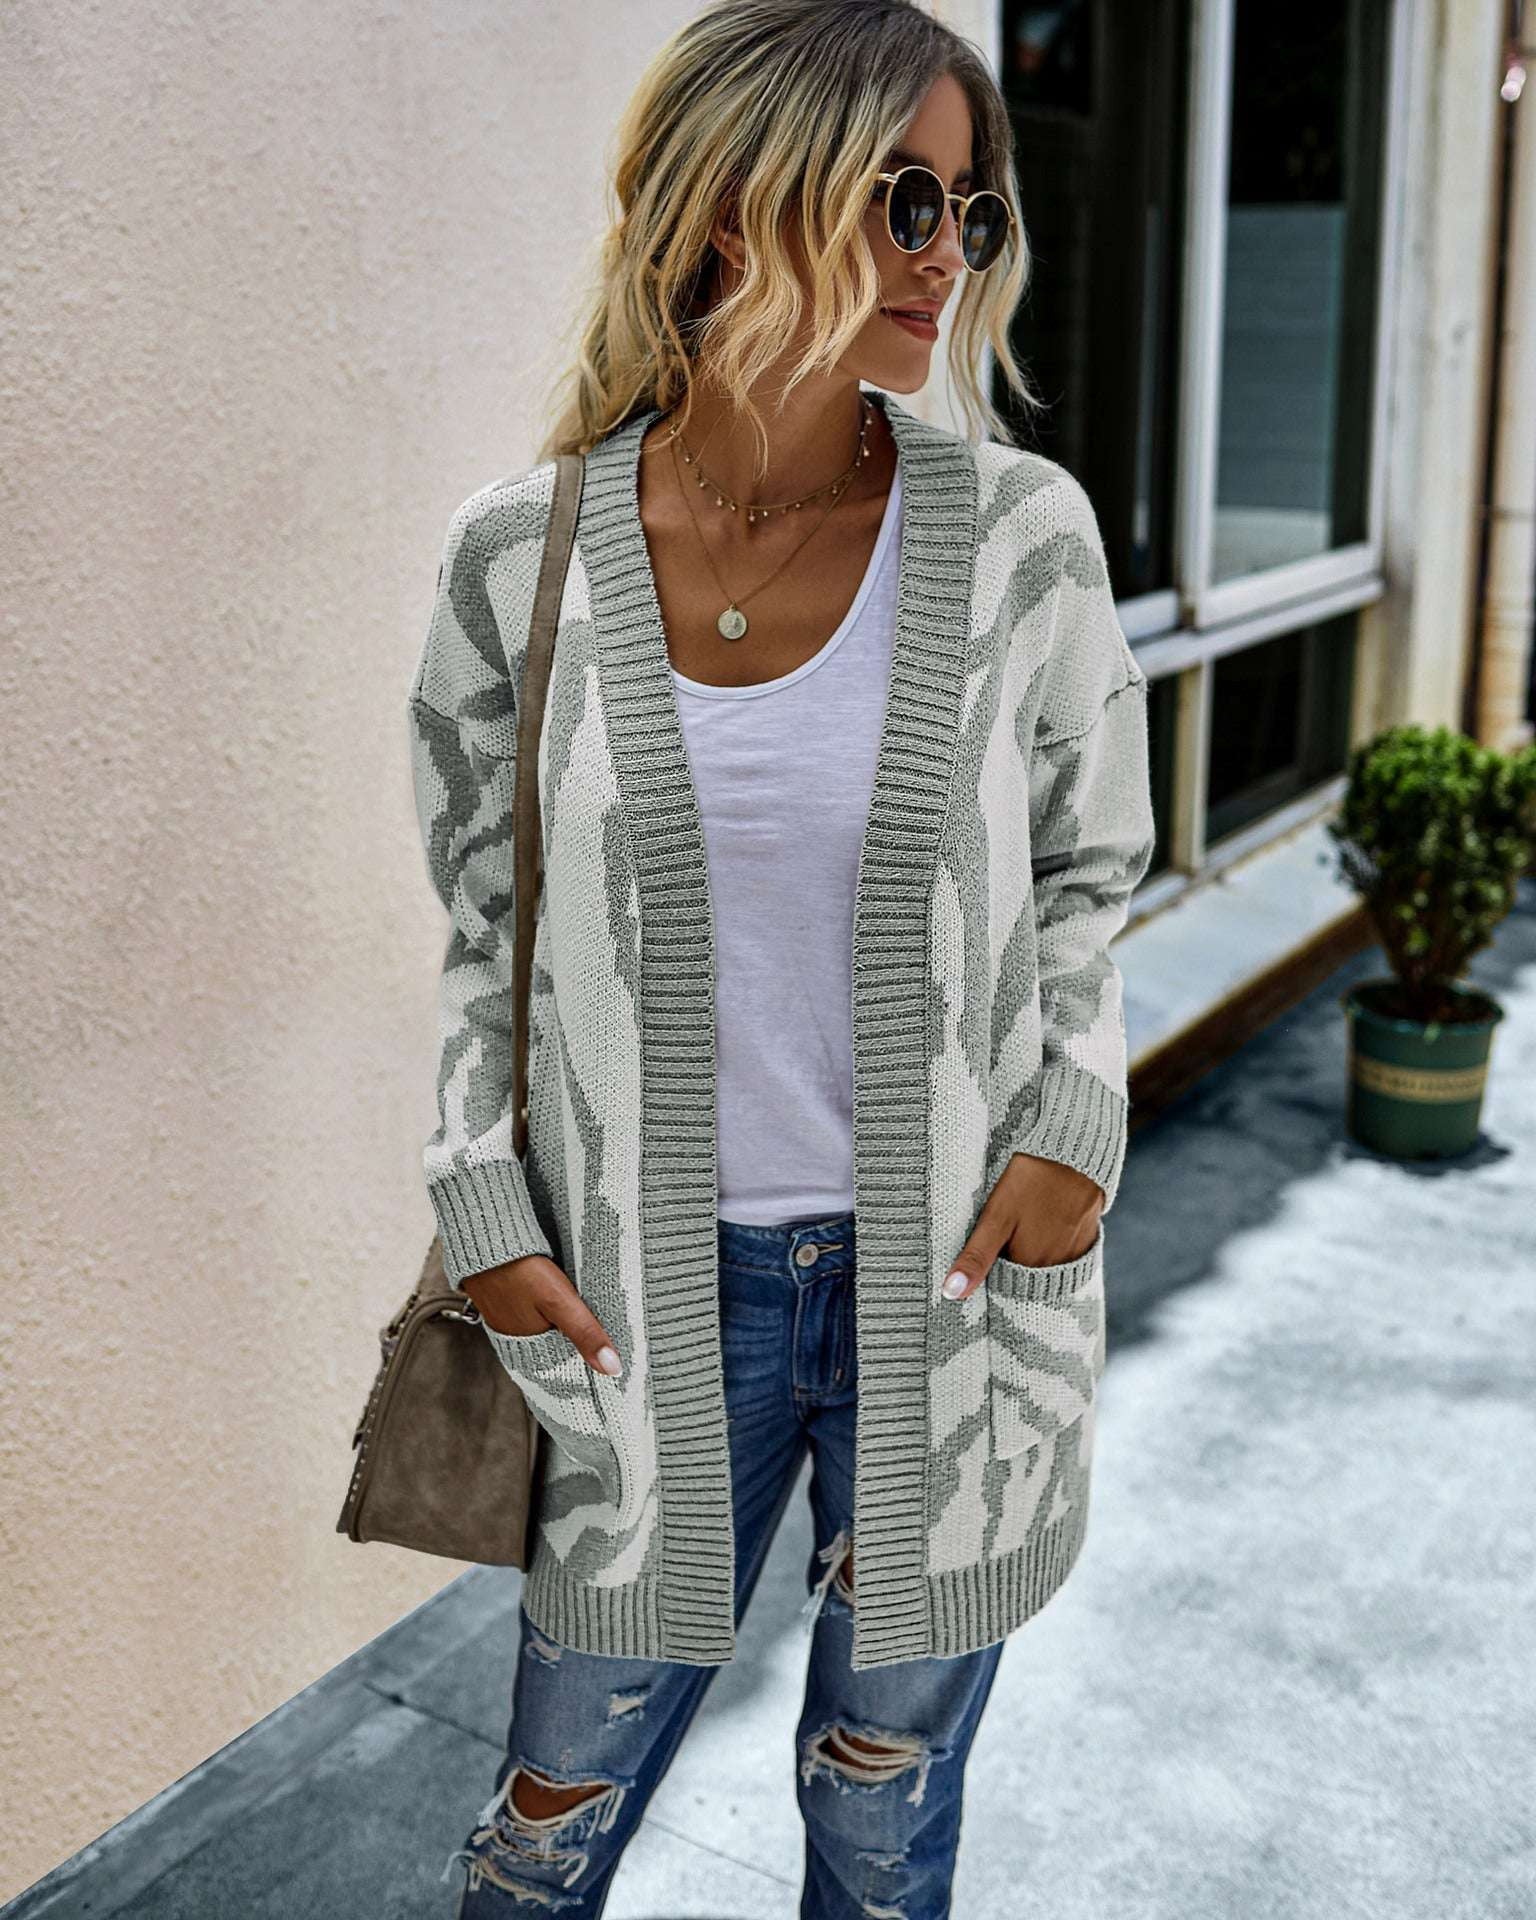 Cozy Street Style Cardigan, Fashionable Cardigan Sweater, Geometric Knit Sweater Coat - available at Sparq Mart